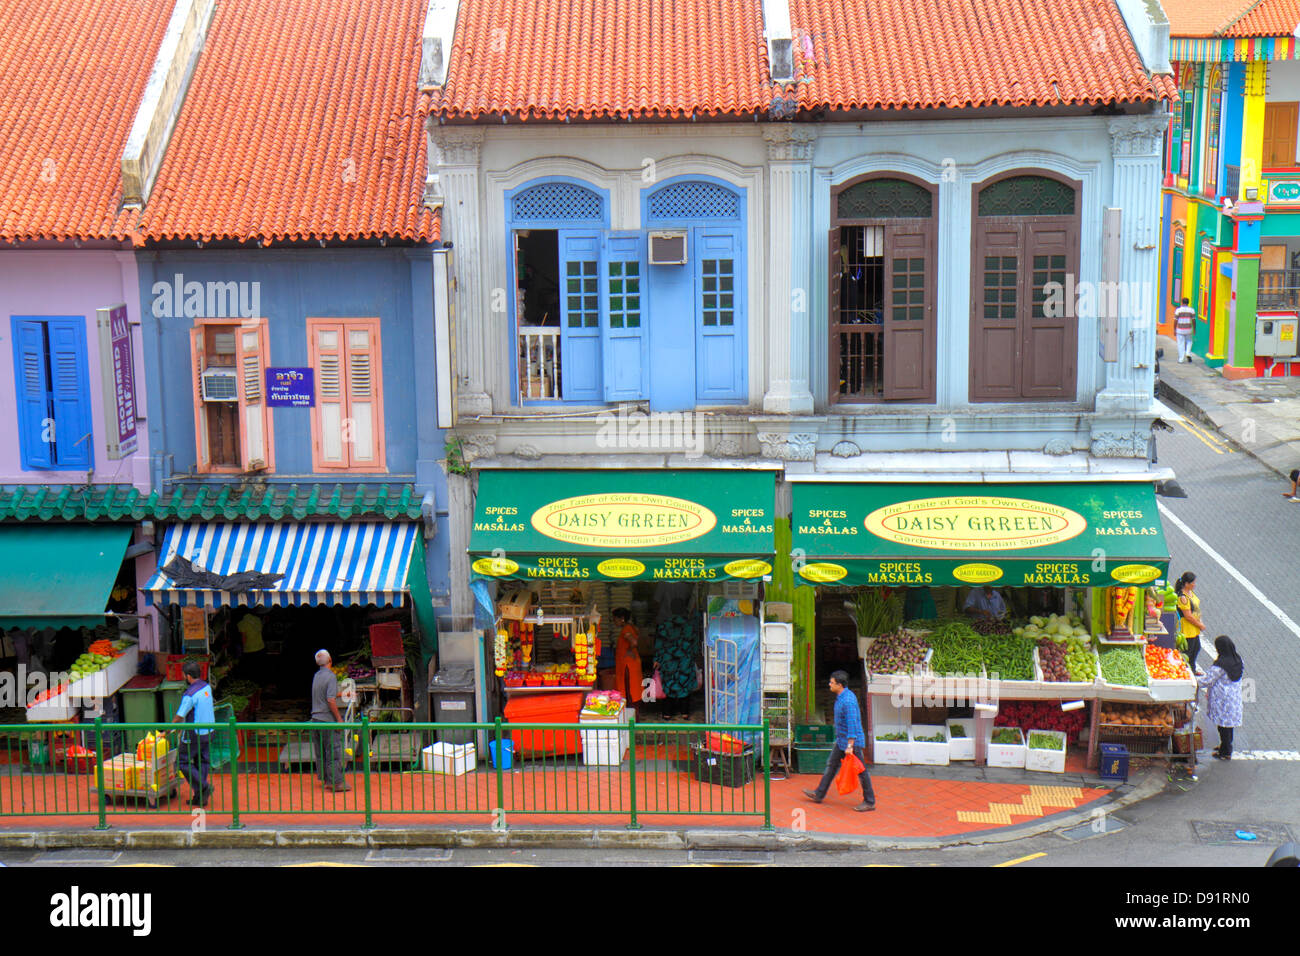 Singapore Little India,Buffalo Road,two-story,storey,shophouses,shophouse,red clay tile roof,businesses,district,Sing130206048 Stock Photo